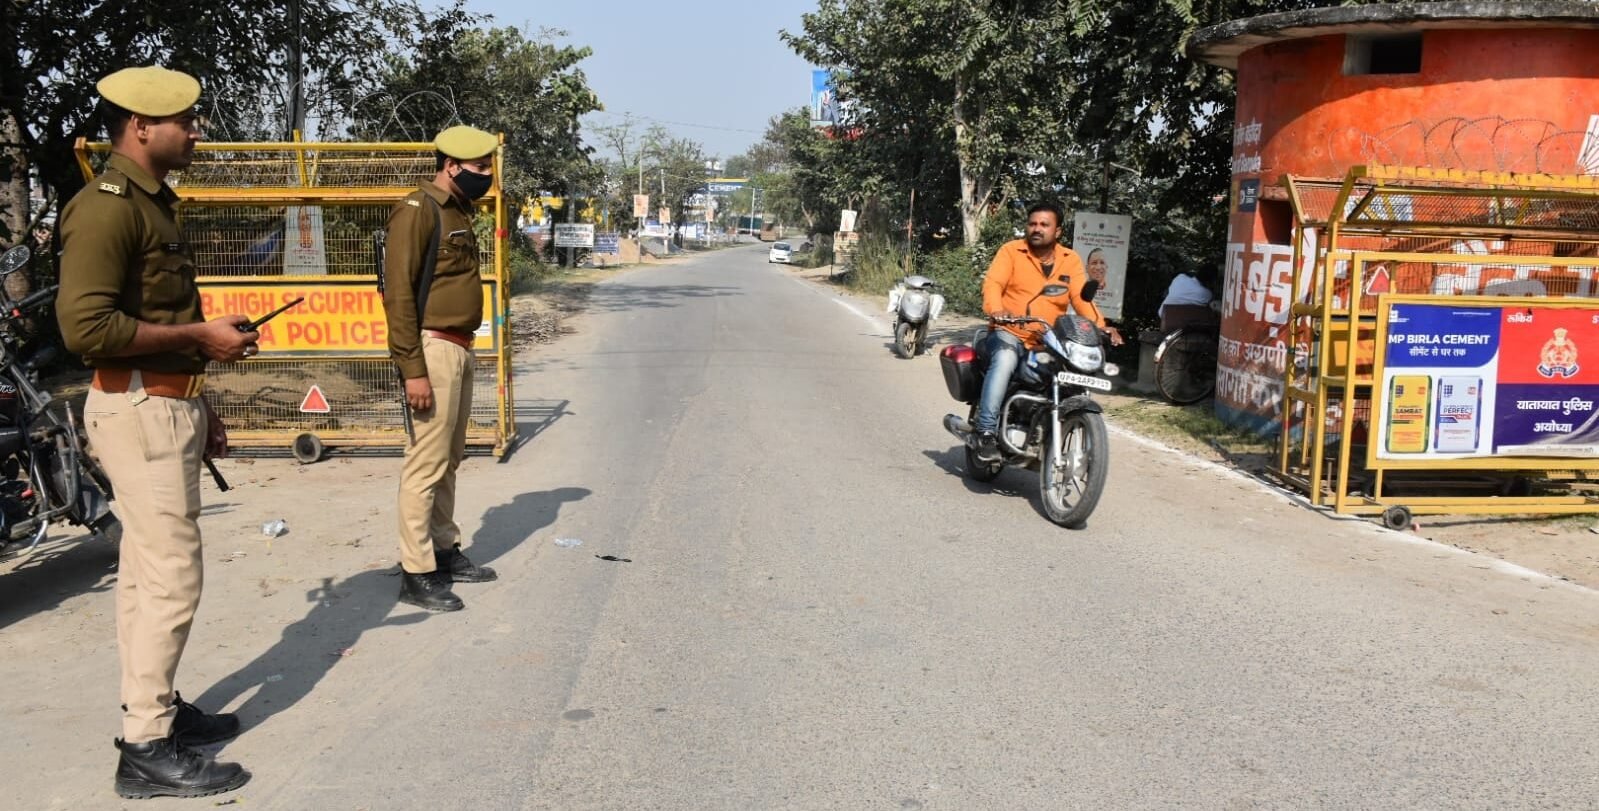 Ayodhya security on alert but calm